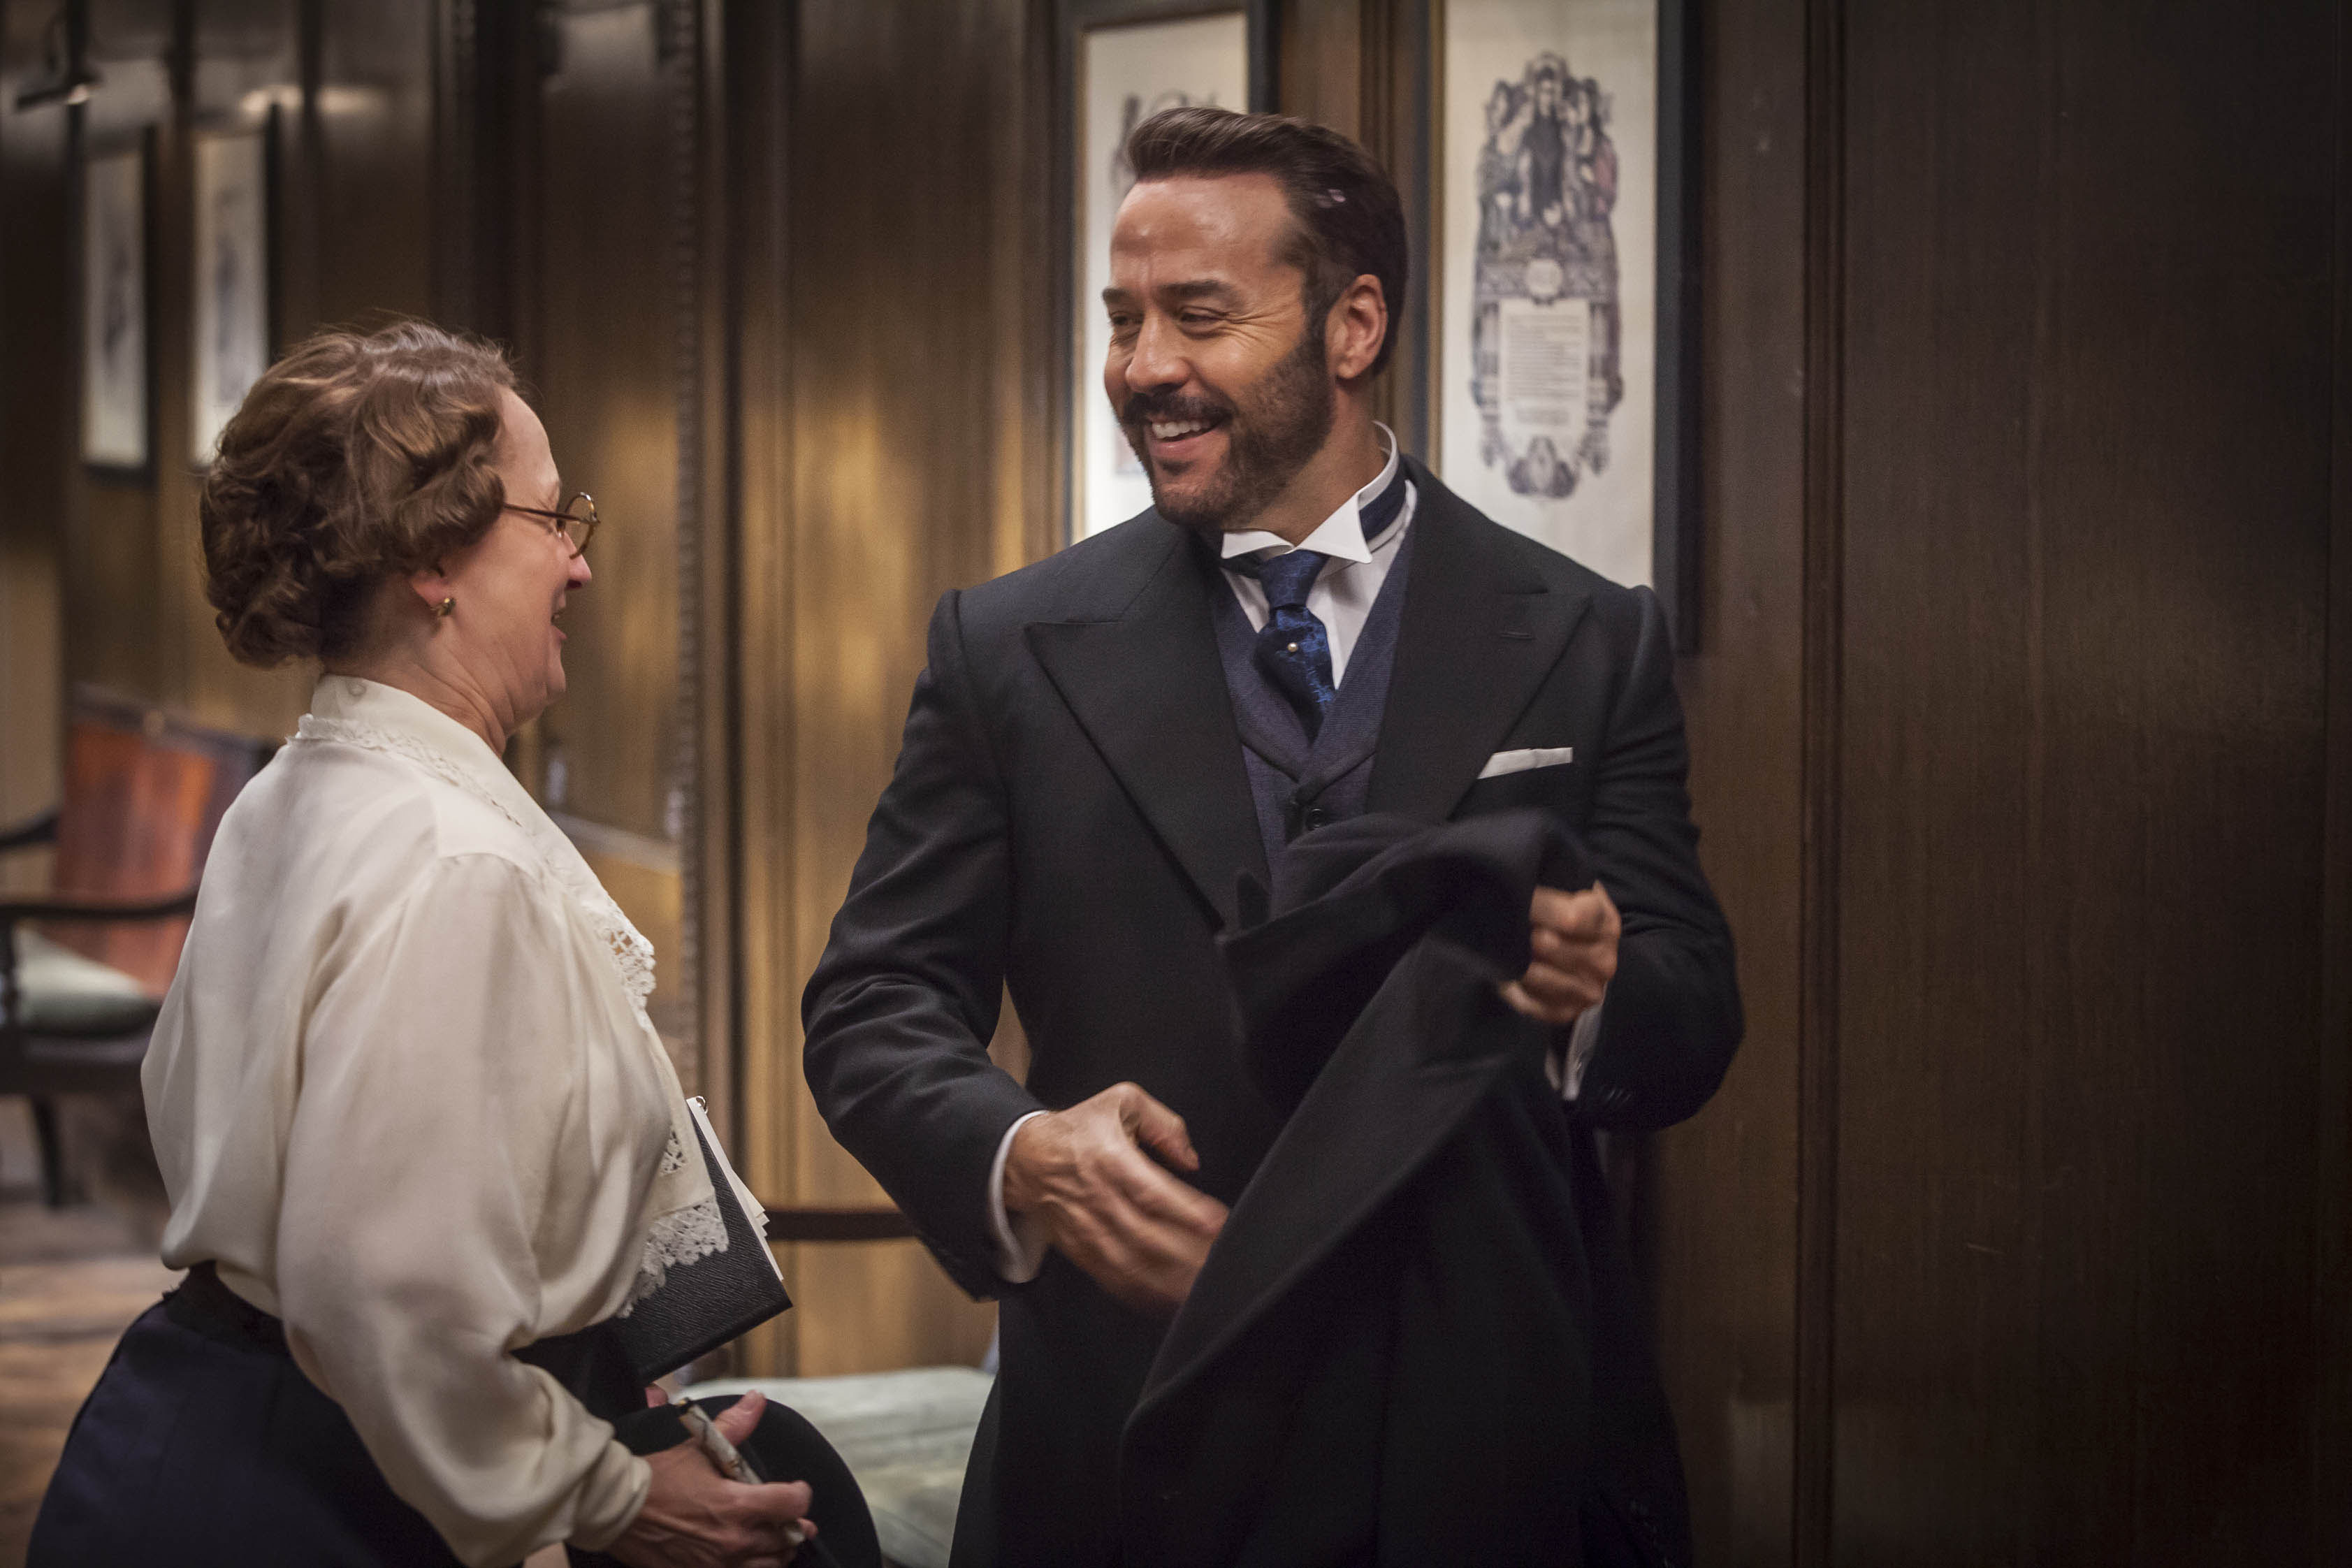 Harry Selfridge, probably playing Telephone with Miss Plunkett. (Photo: Courtesy of John Rogers/ITV Studios for MASTERPIECE)